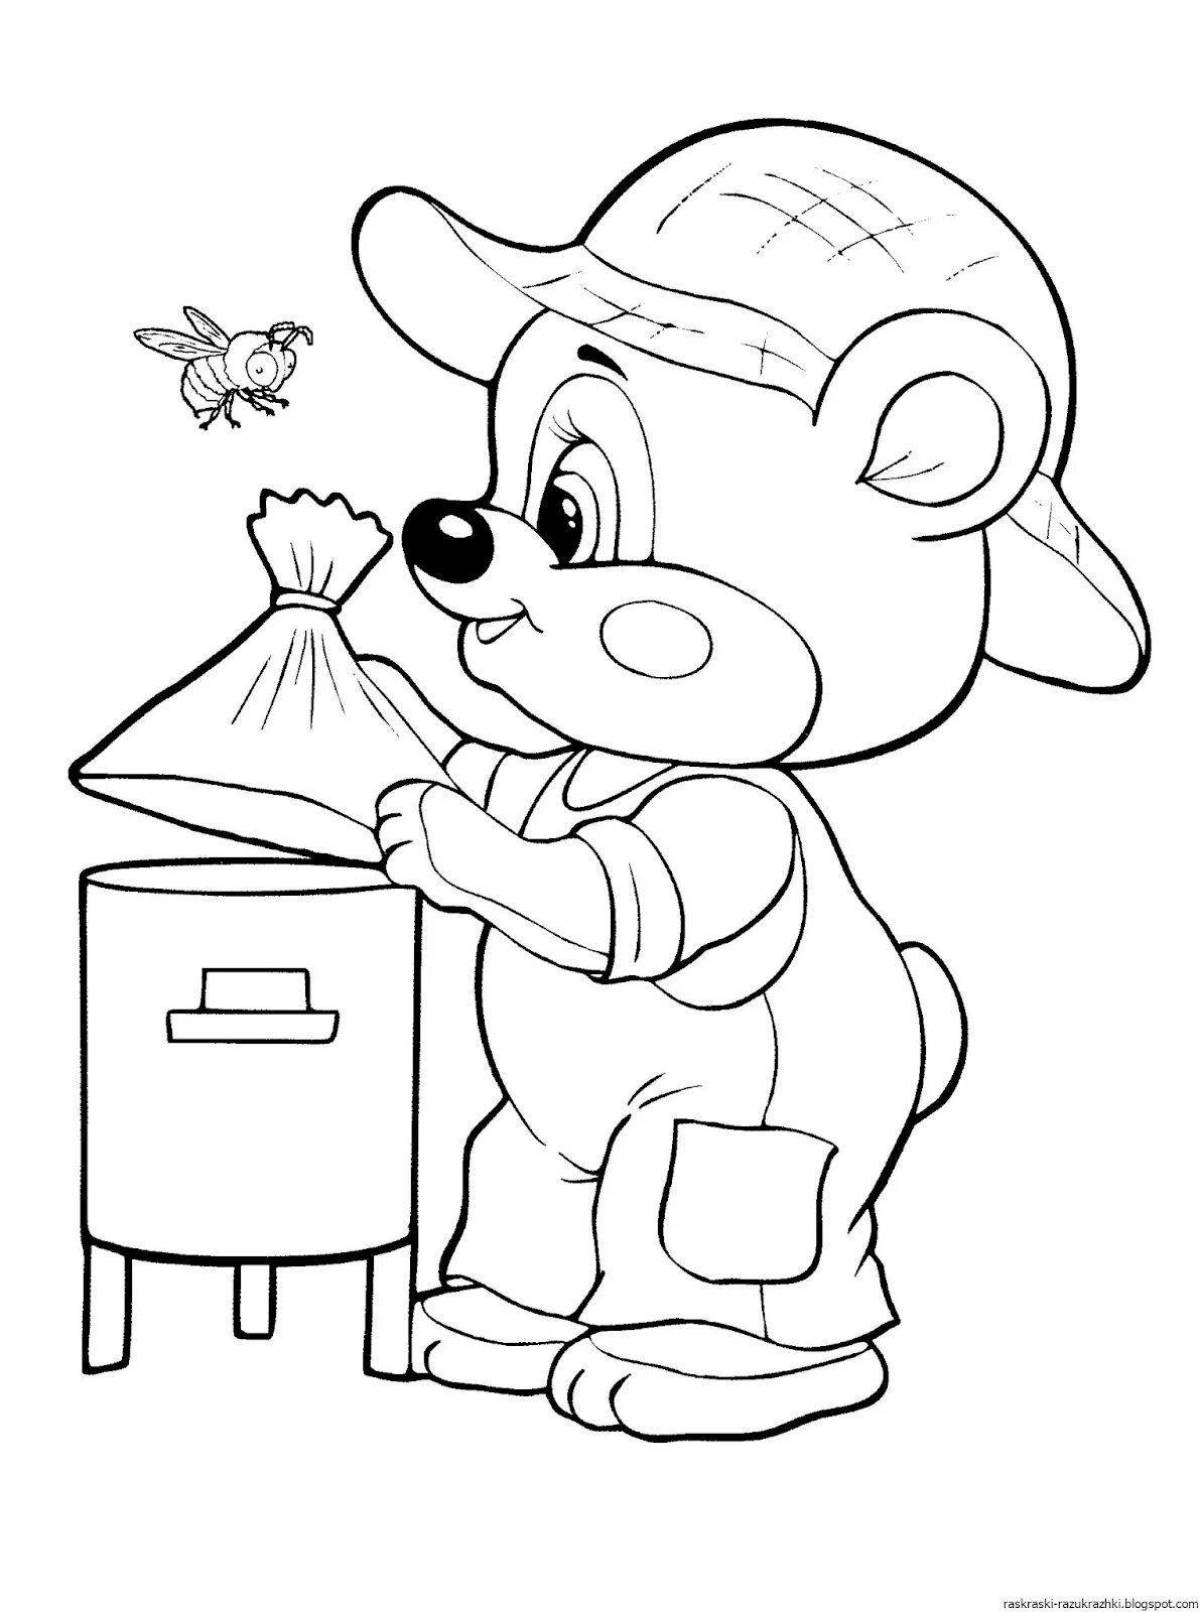 Coloring page festive tramp